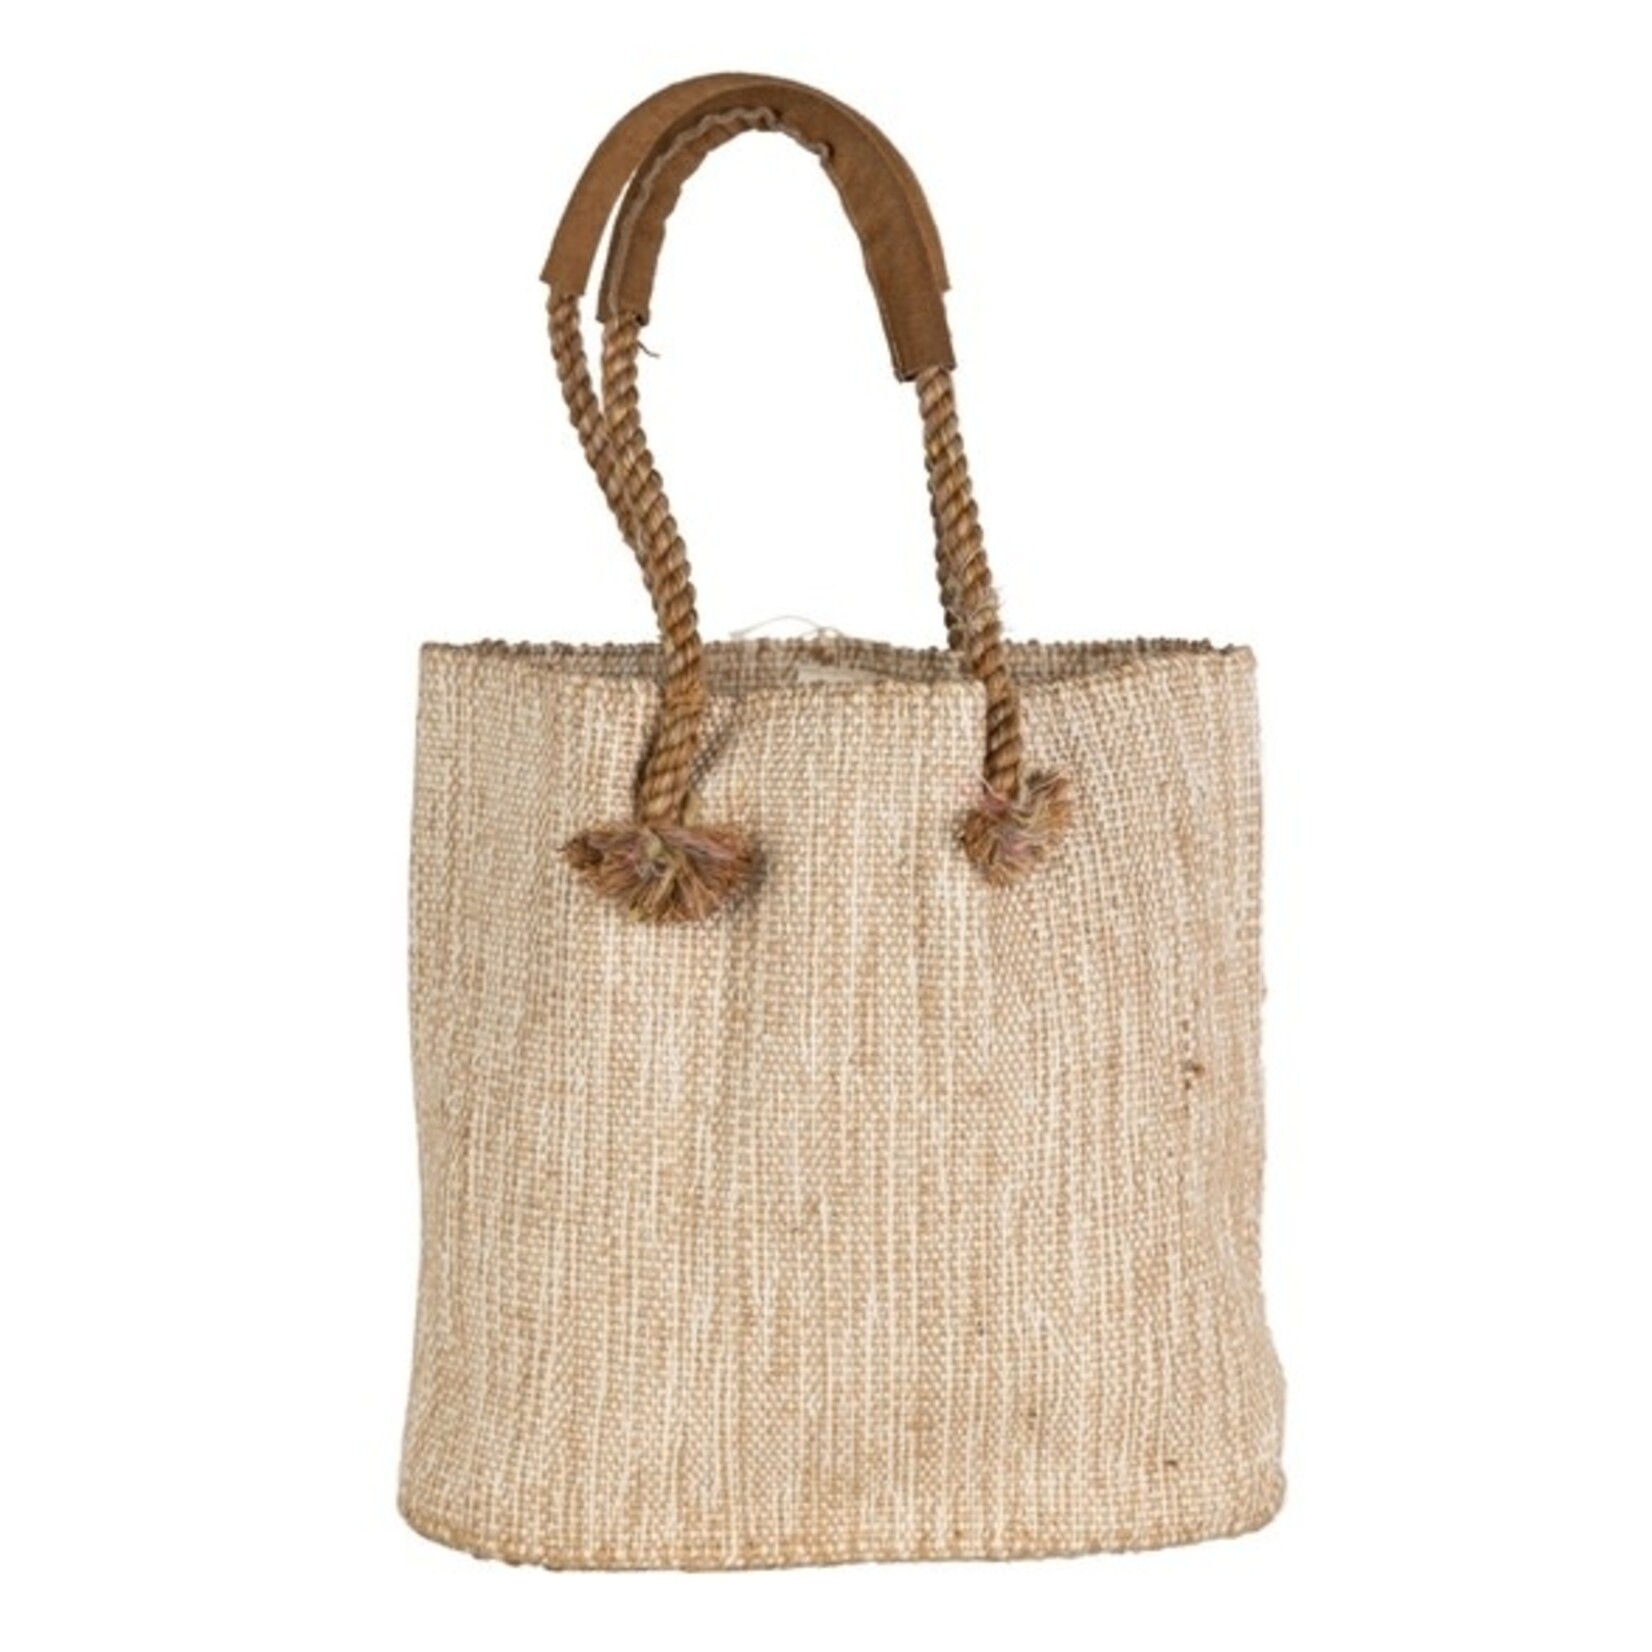 Ten Thousand Villages USA Jute and Cotton Tote with Leather Handles, Bangladesh